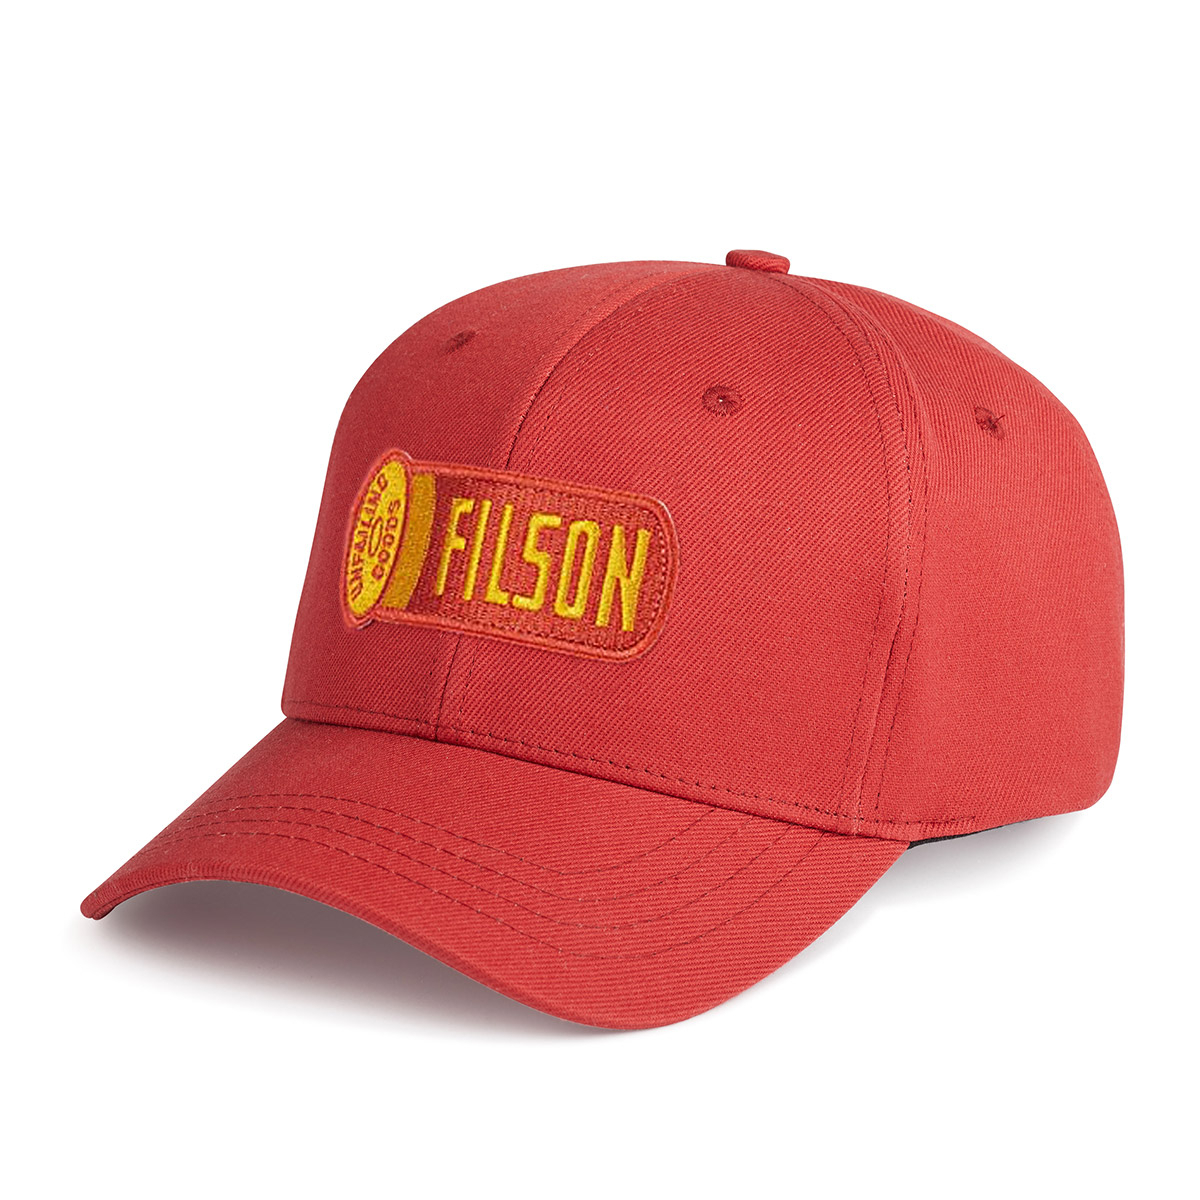 Filson Logger Cap Cardinal Red, classic hard-working cap that protects ...